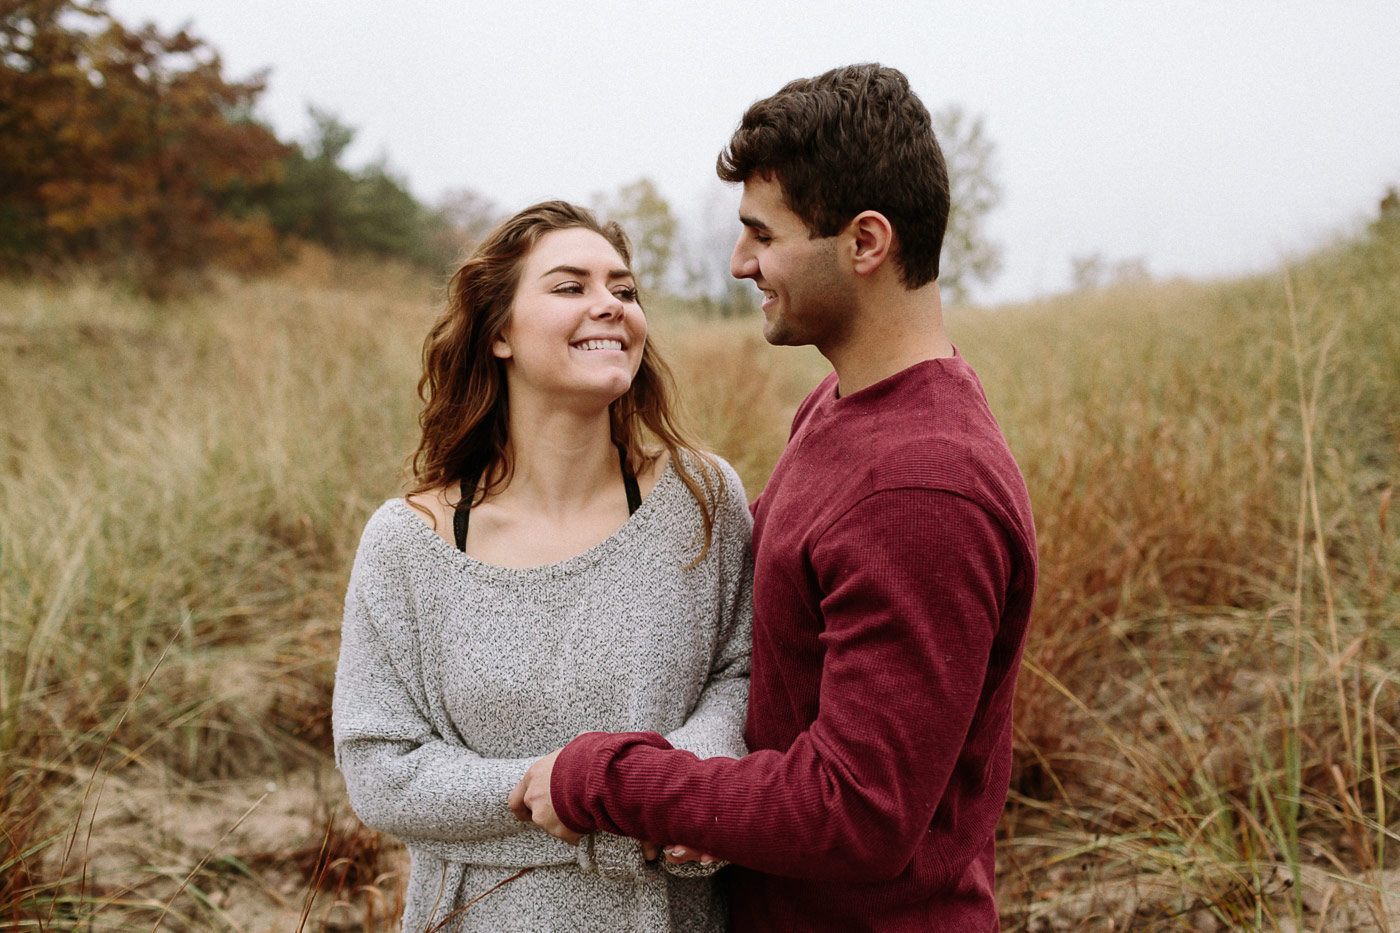 Couple smiling and laughing in the beach grass